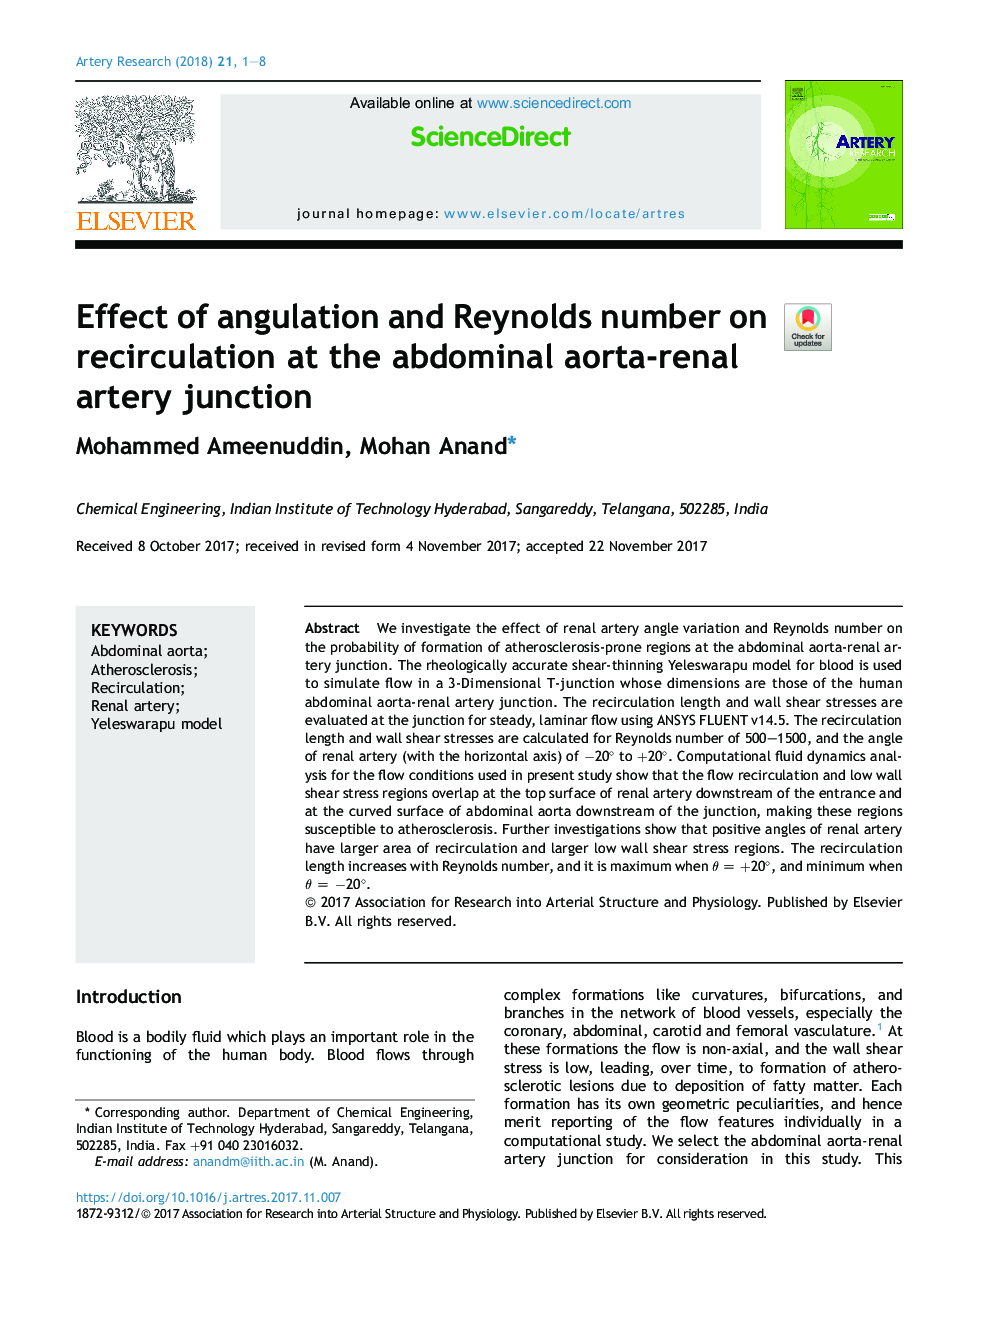 Effect of angulation and Reynolds number on recirculation at the abdominal aorta-renal artery junction